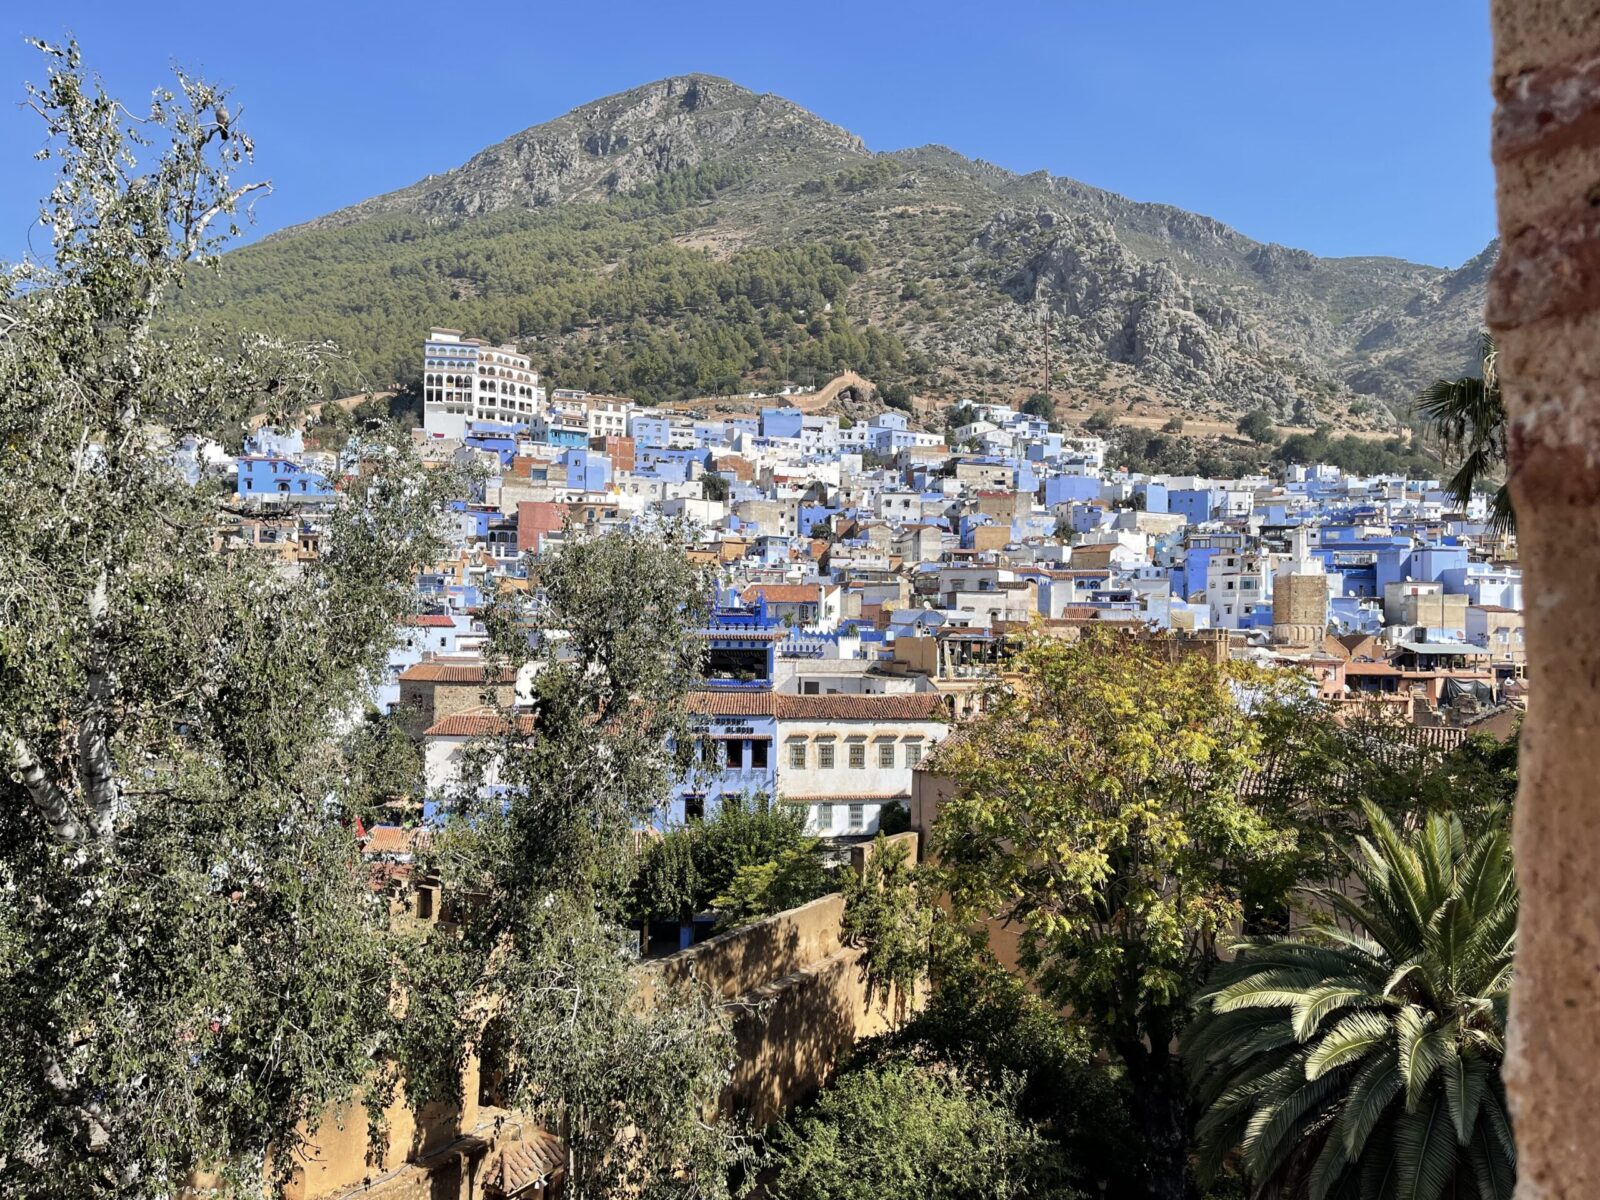 Blue and white buildings on a mountainside